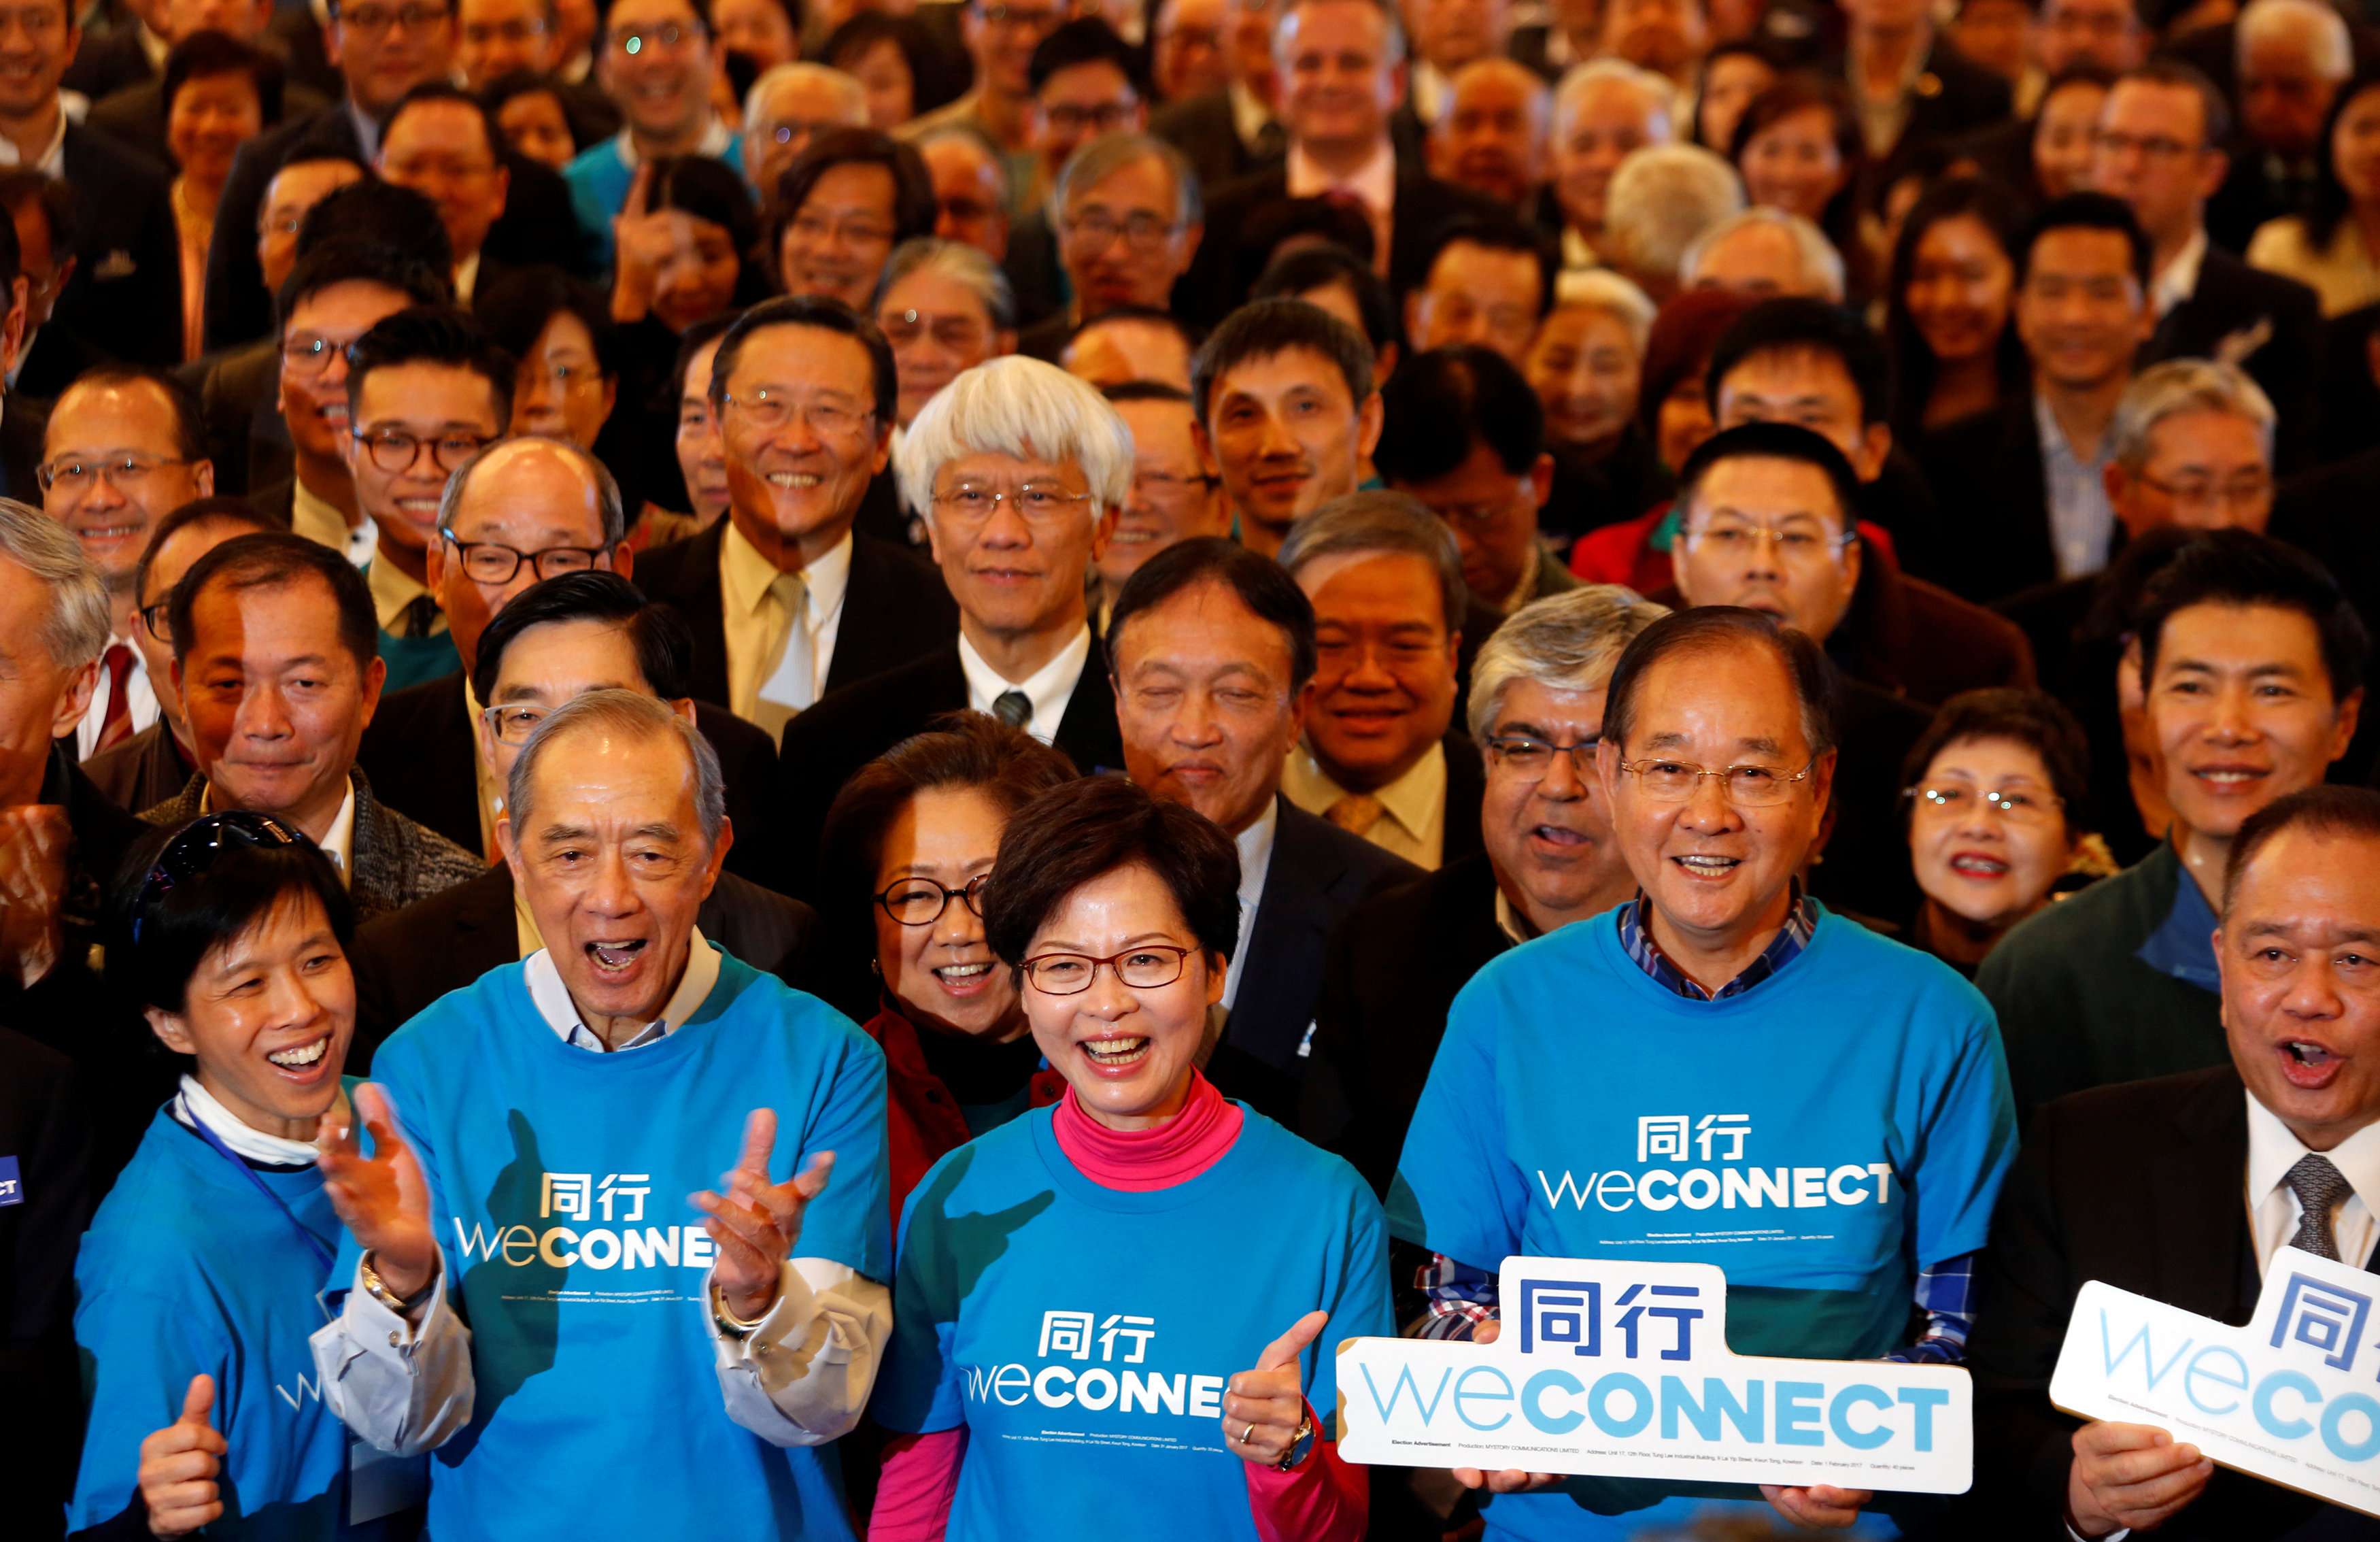 Chief executive contender Carrie Lam poses with her supporters during the launch of her campaign on February 3. Can her rich and powerful backers really help to bring about the “new style of government” she promises, solve housing problems and offer a “new vision”? Photo: Reuters